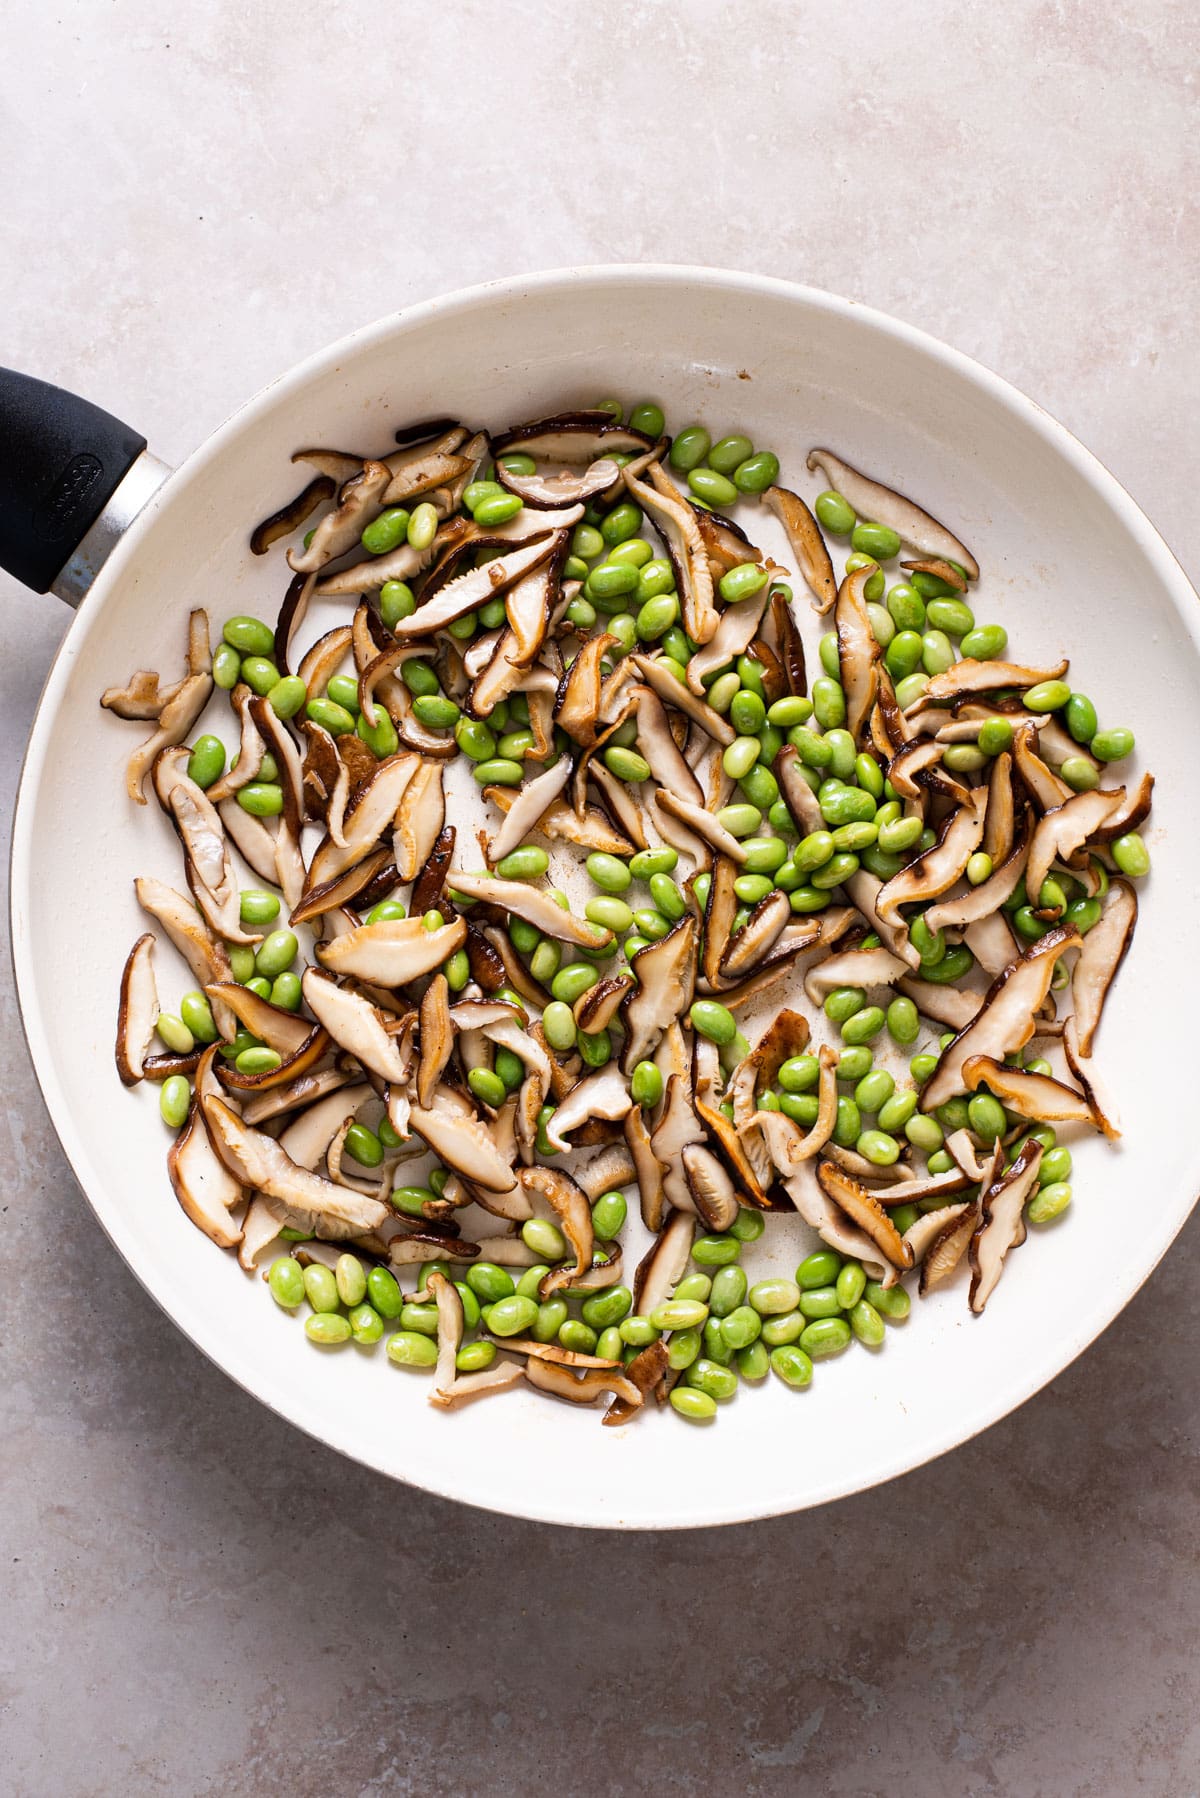 Sauteed shiitakes and edamame in a skillet.